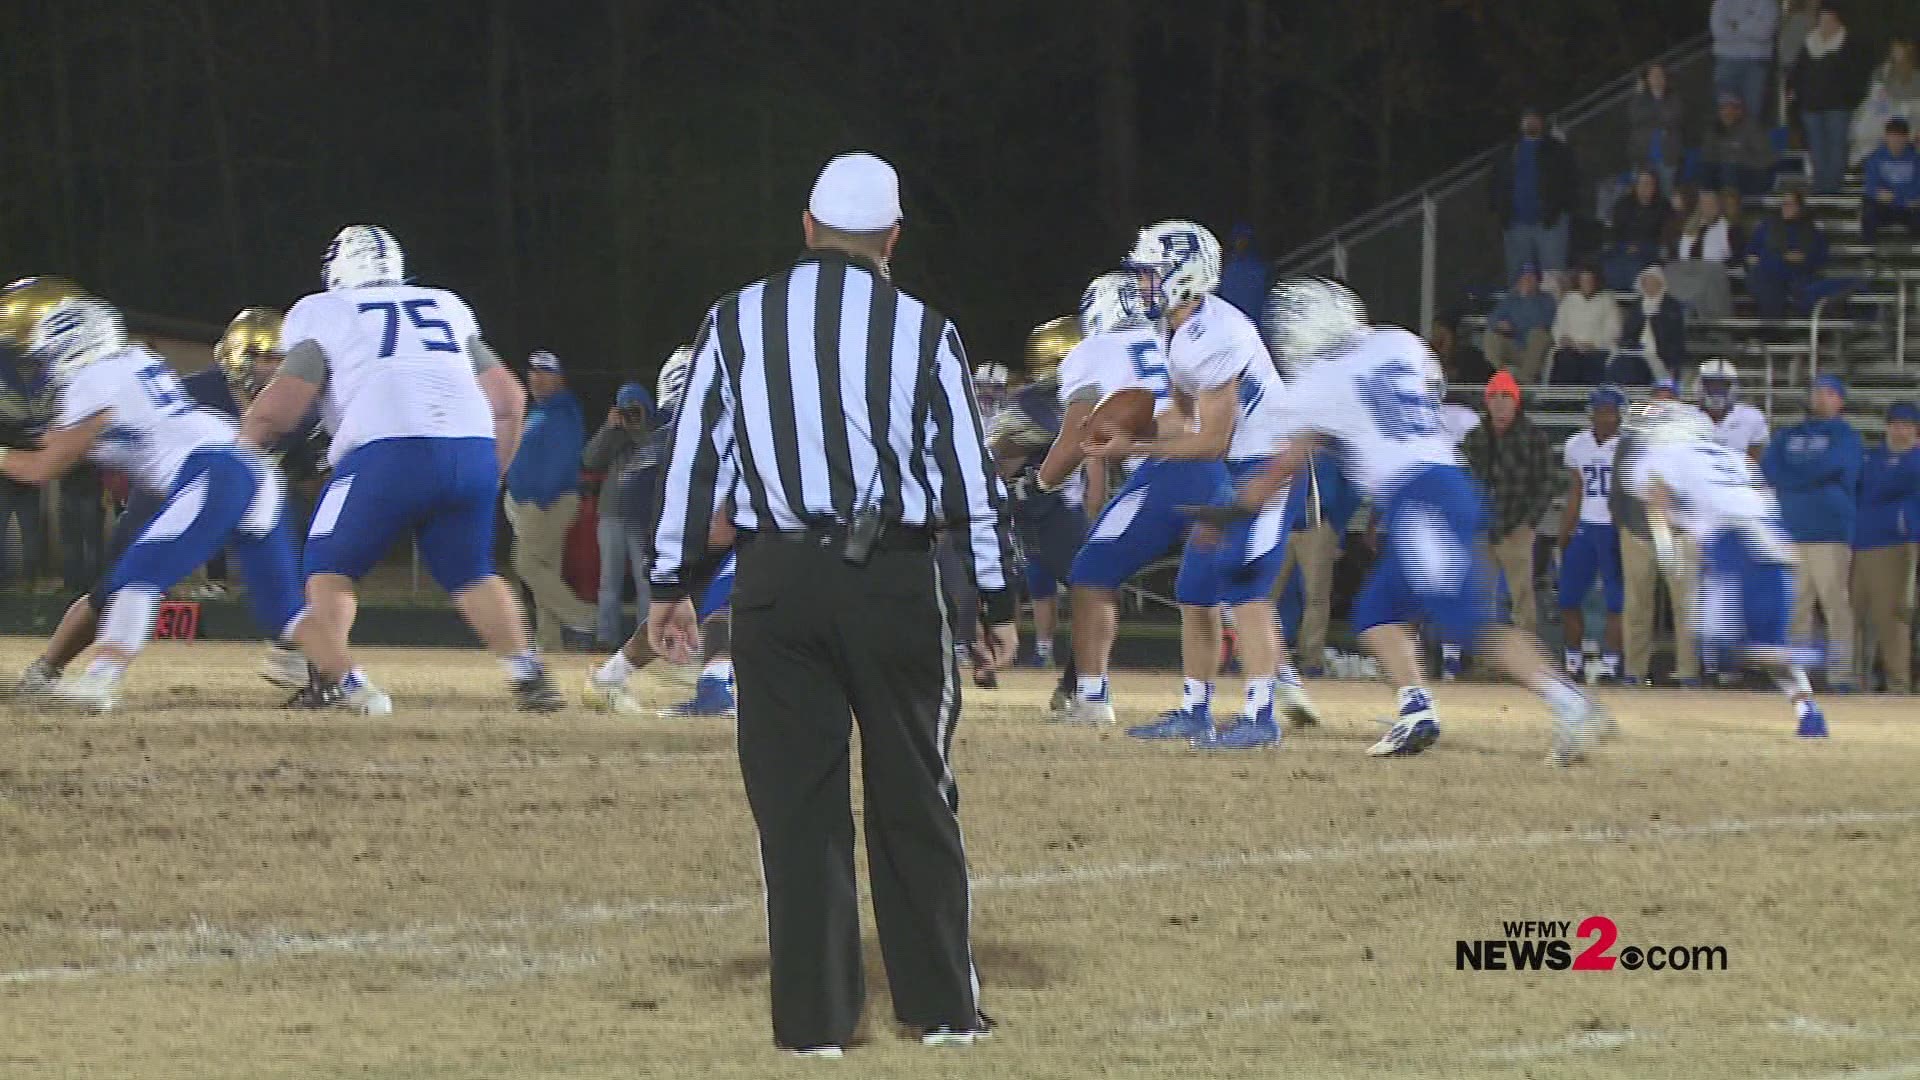 First half highlights between Reidsville and Brevard for the third round playoff matchup.